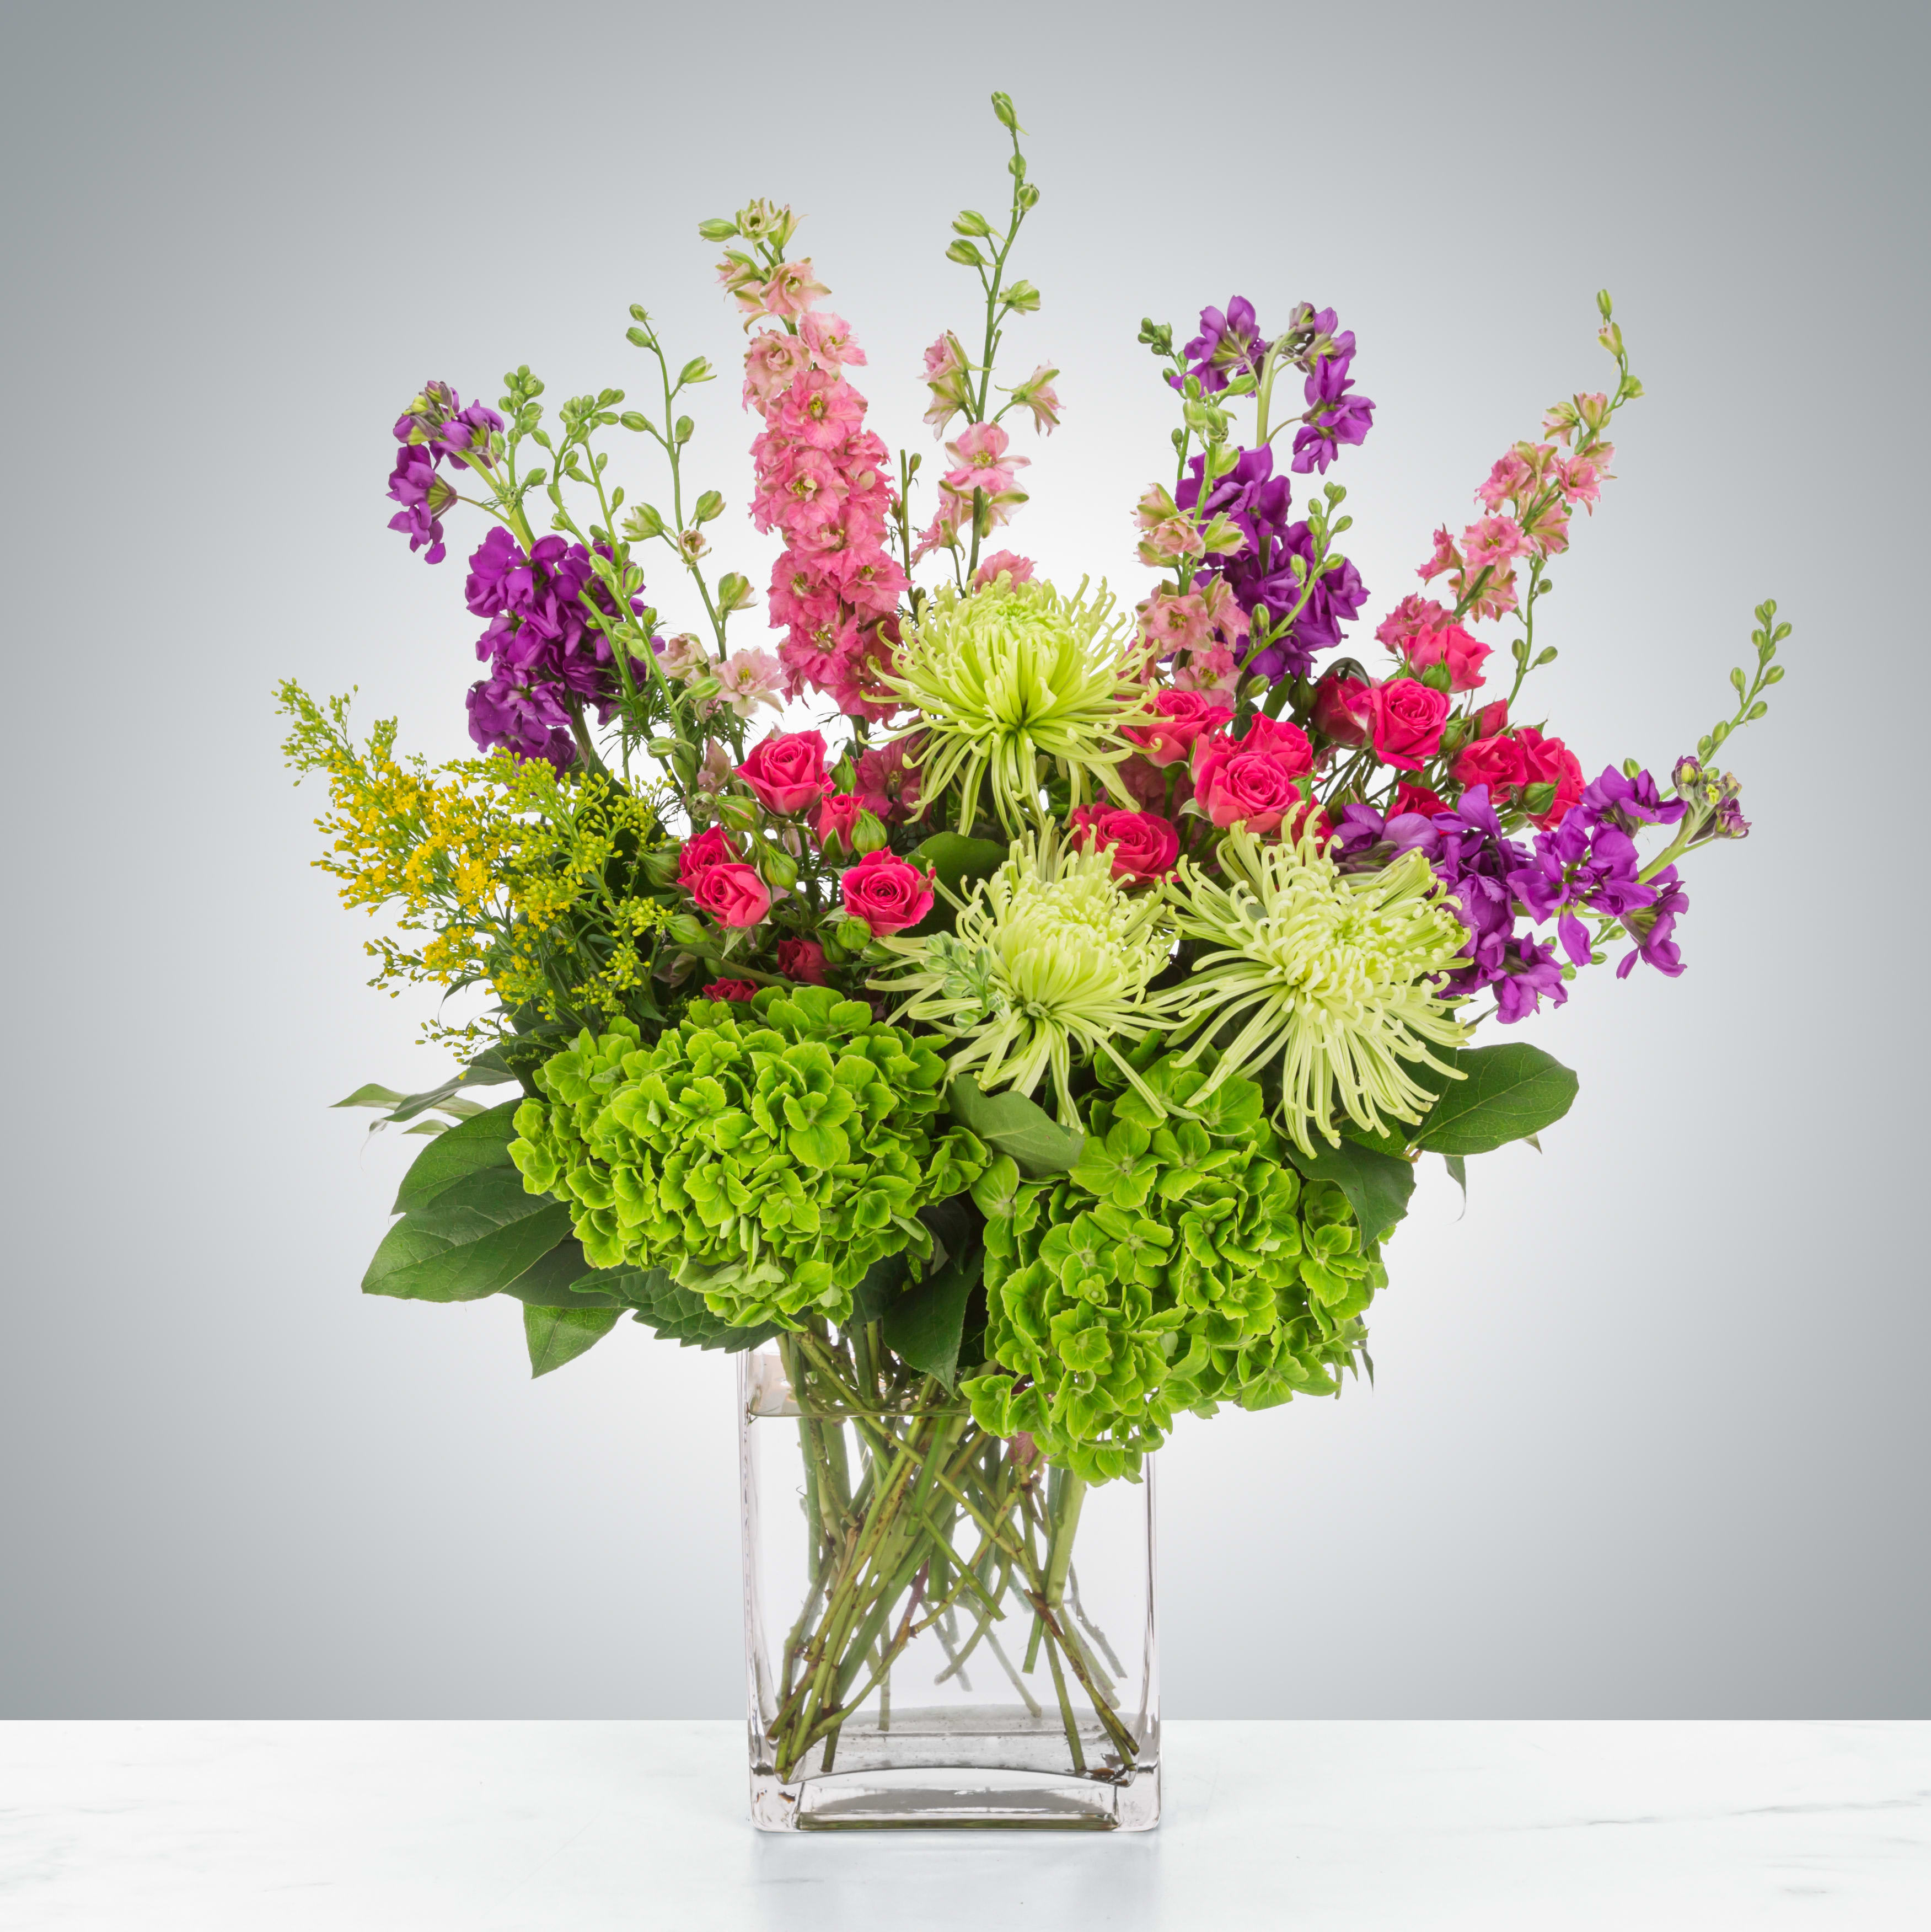 Sparklers by BloomNation™ - Featuring larkspur, spider mums, spray roses, and hydrangea this arrangement brings a brightly colored spark to anybody's life. Send it for birthdays, congratulations, and more.  Approximate Dimensions: 15&quot;D x 18&quot;H